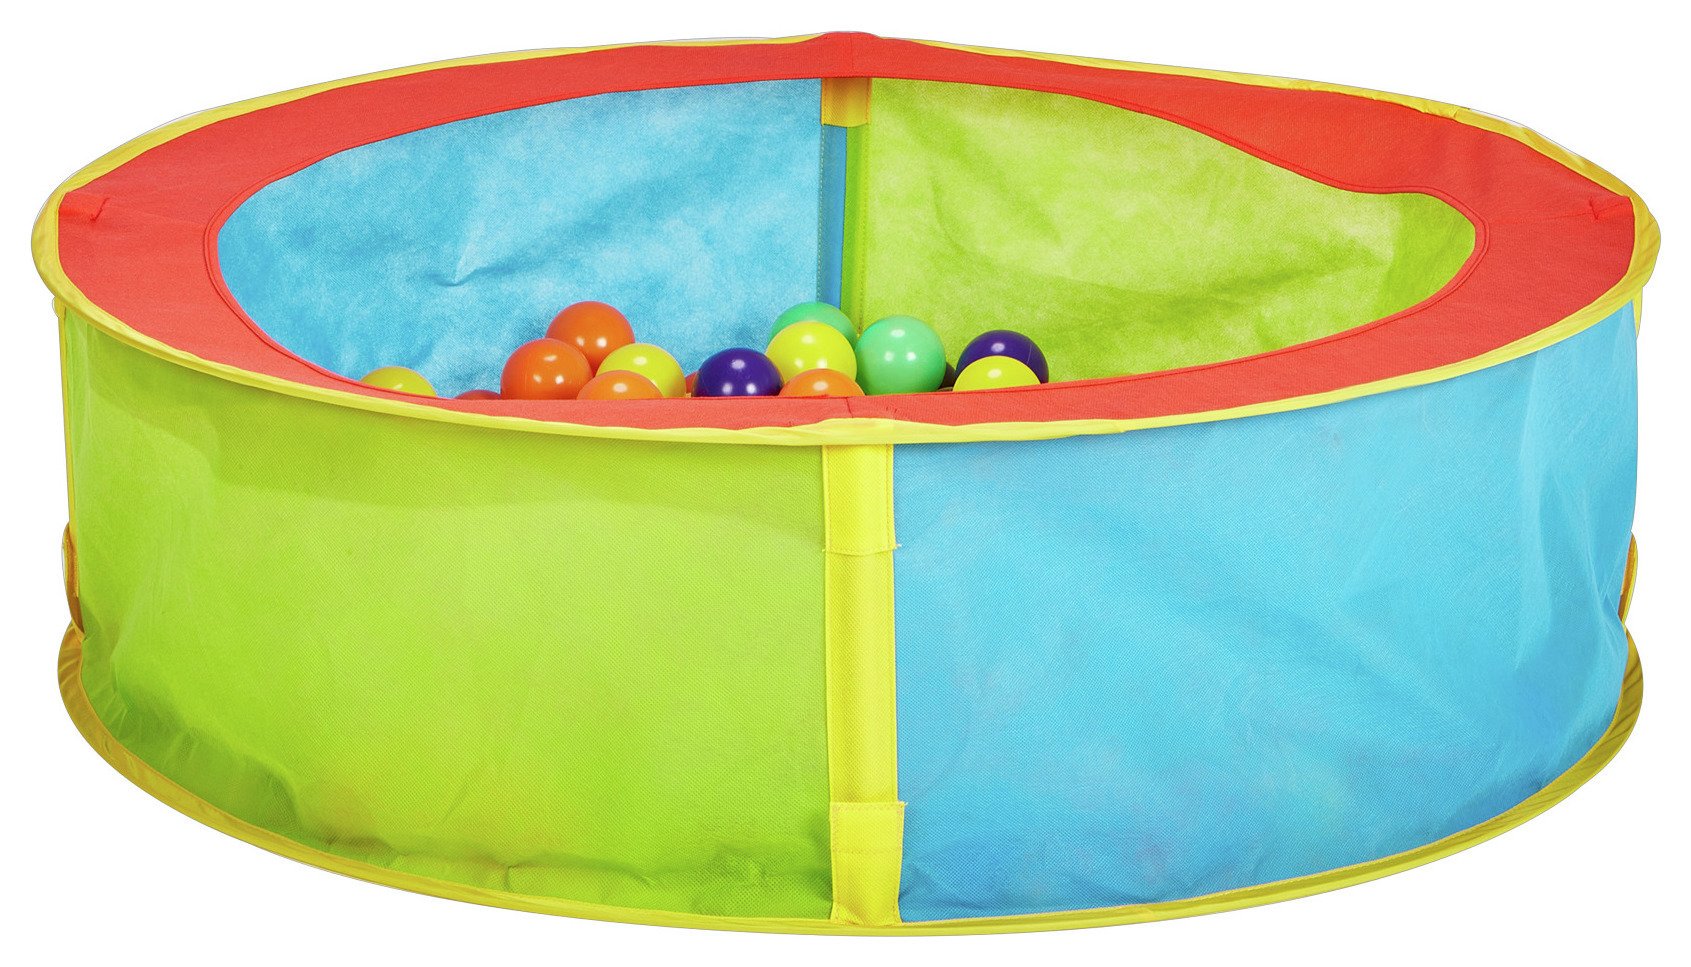 Chad Valley Pop Up Ball Pit Review